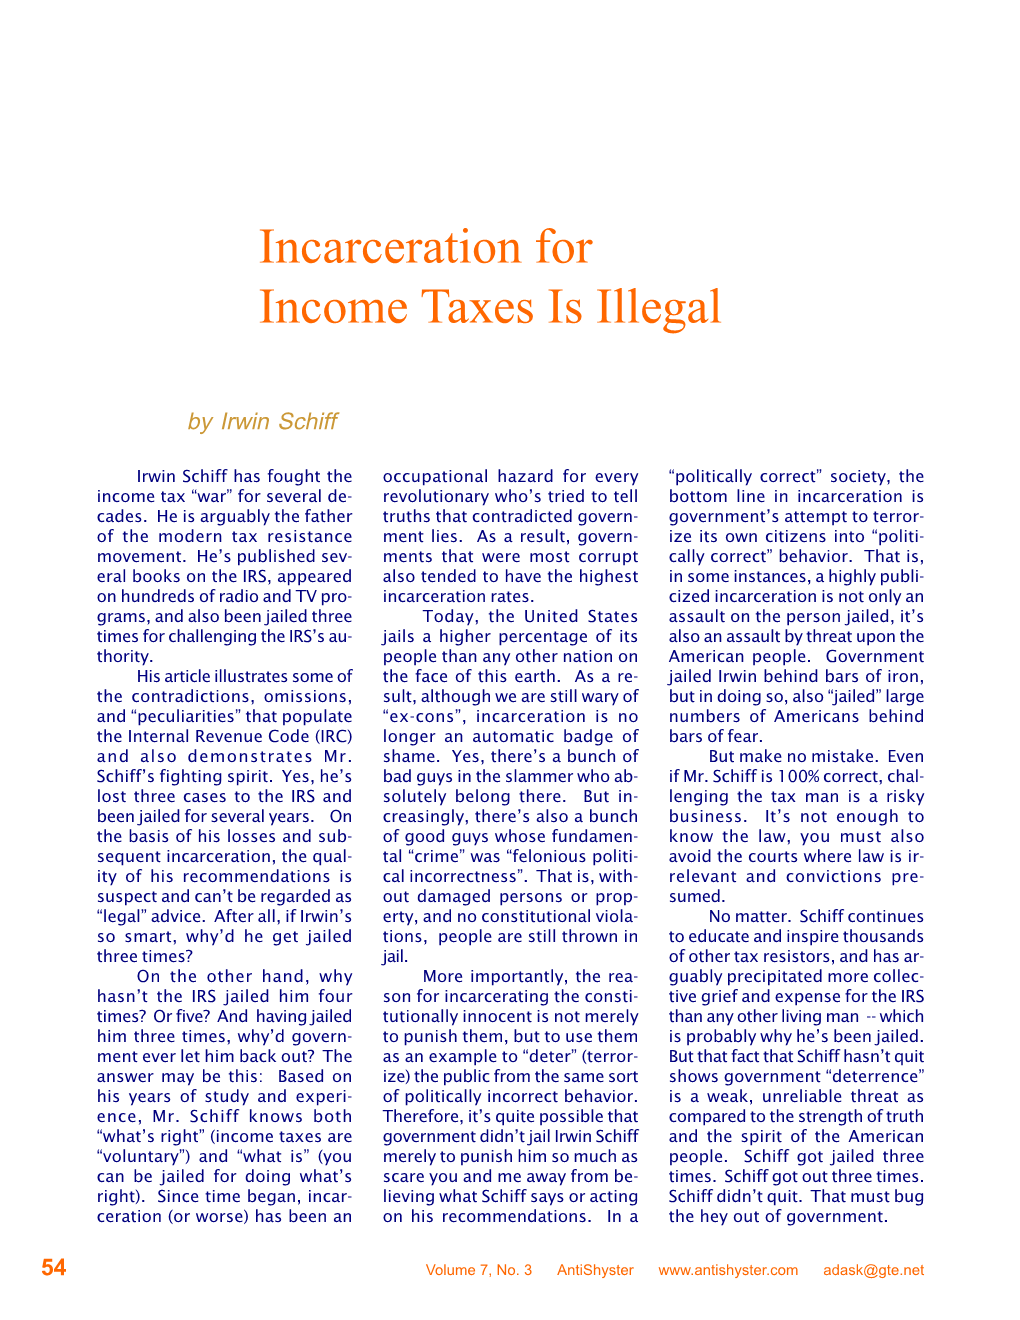 Incarceration for Income Taxes Is Illegal